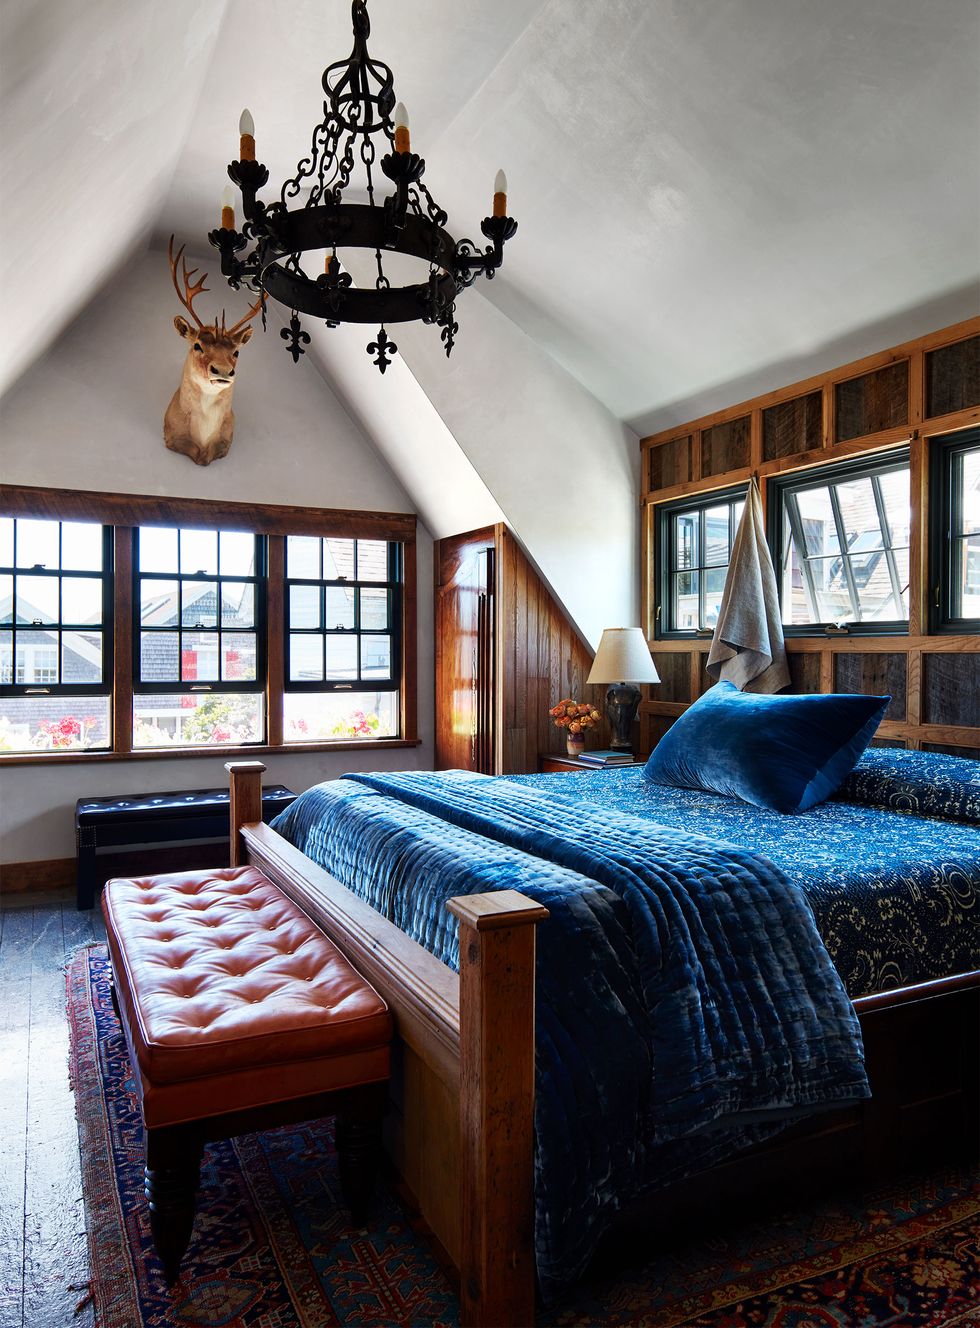 a primary bedroom has deep blue bedding, vented windows above bed, a tufted leather bench at foot of bed and another by a second set of windows, wrought iron chandelier, and a taxidermied deer’s head on wall